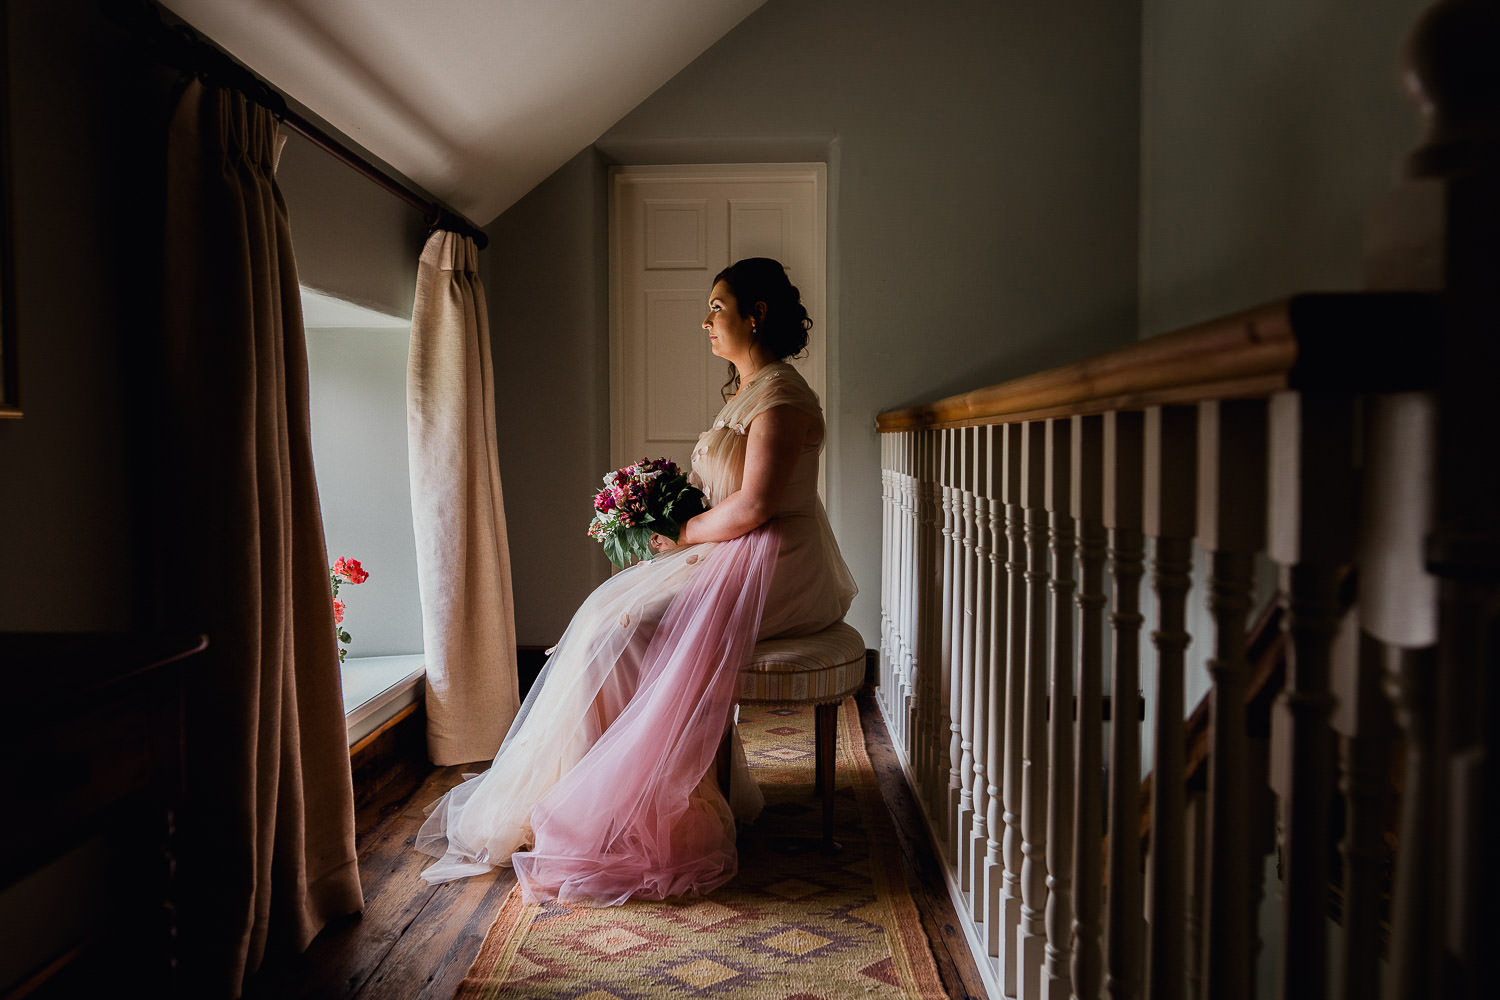 bride sitting on a chair in window light